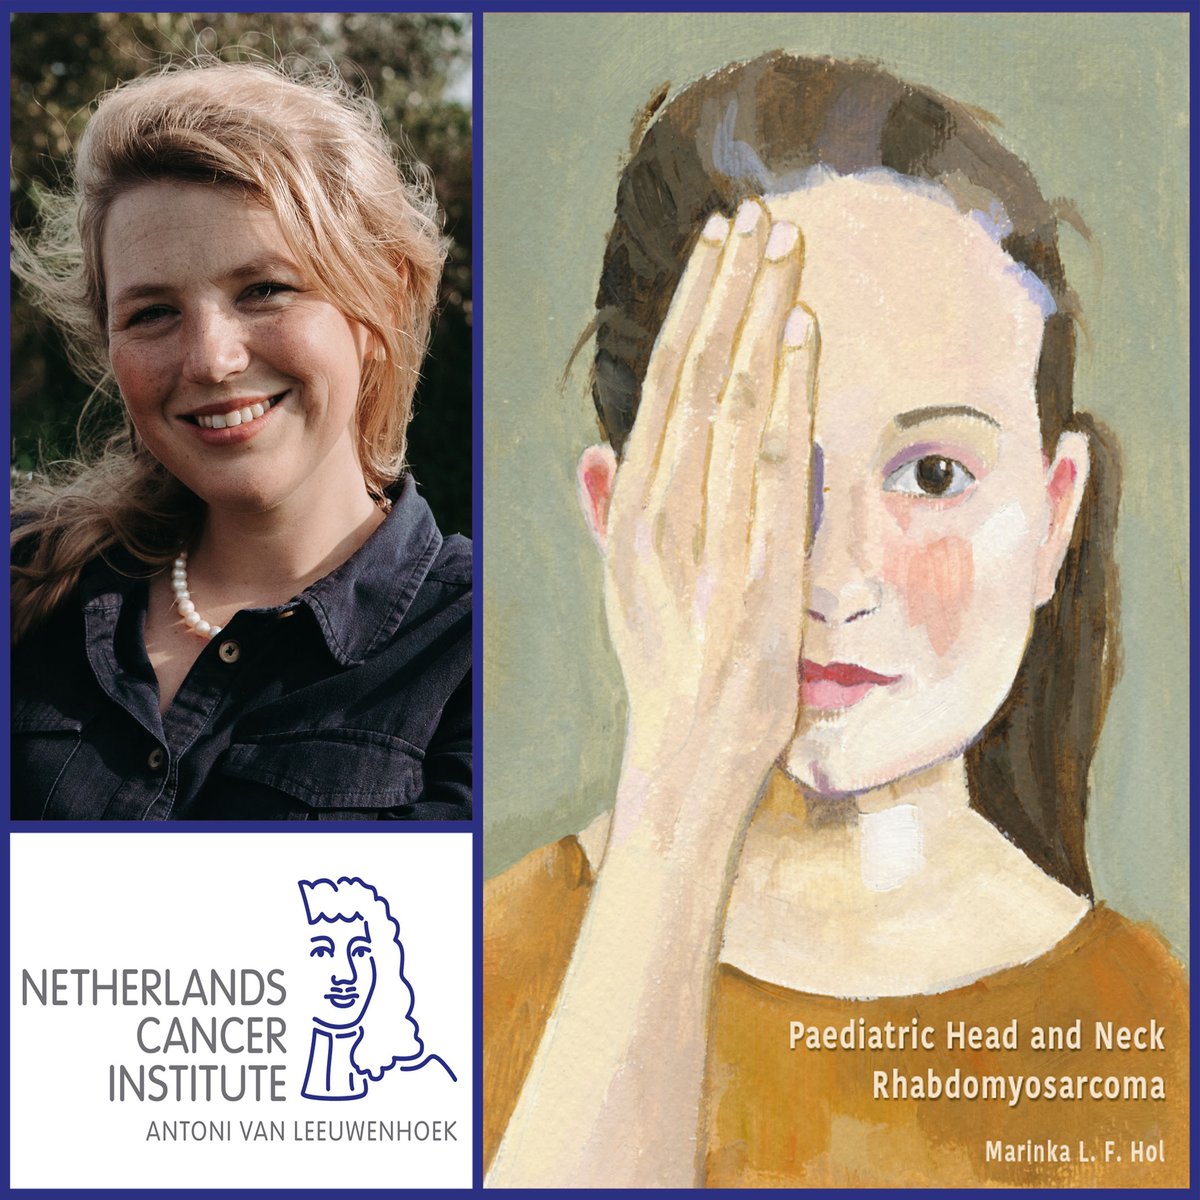 In four international centers, PhD. candidate Marinka Hol investigated facial abnormalities and other late effects of tumors in children. Marinka will defend her thesis on April 12 ➡️ bit.ly/3TS7UN2 @hetAVL @UvA_Amsterdam @prinsesmaximac